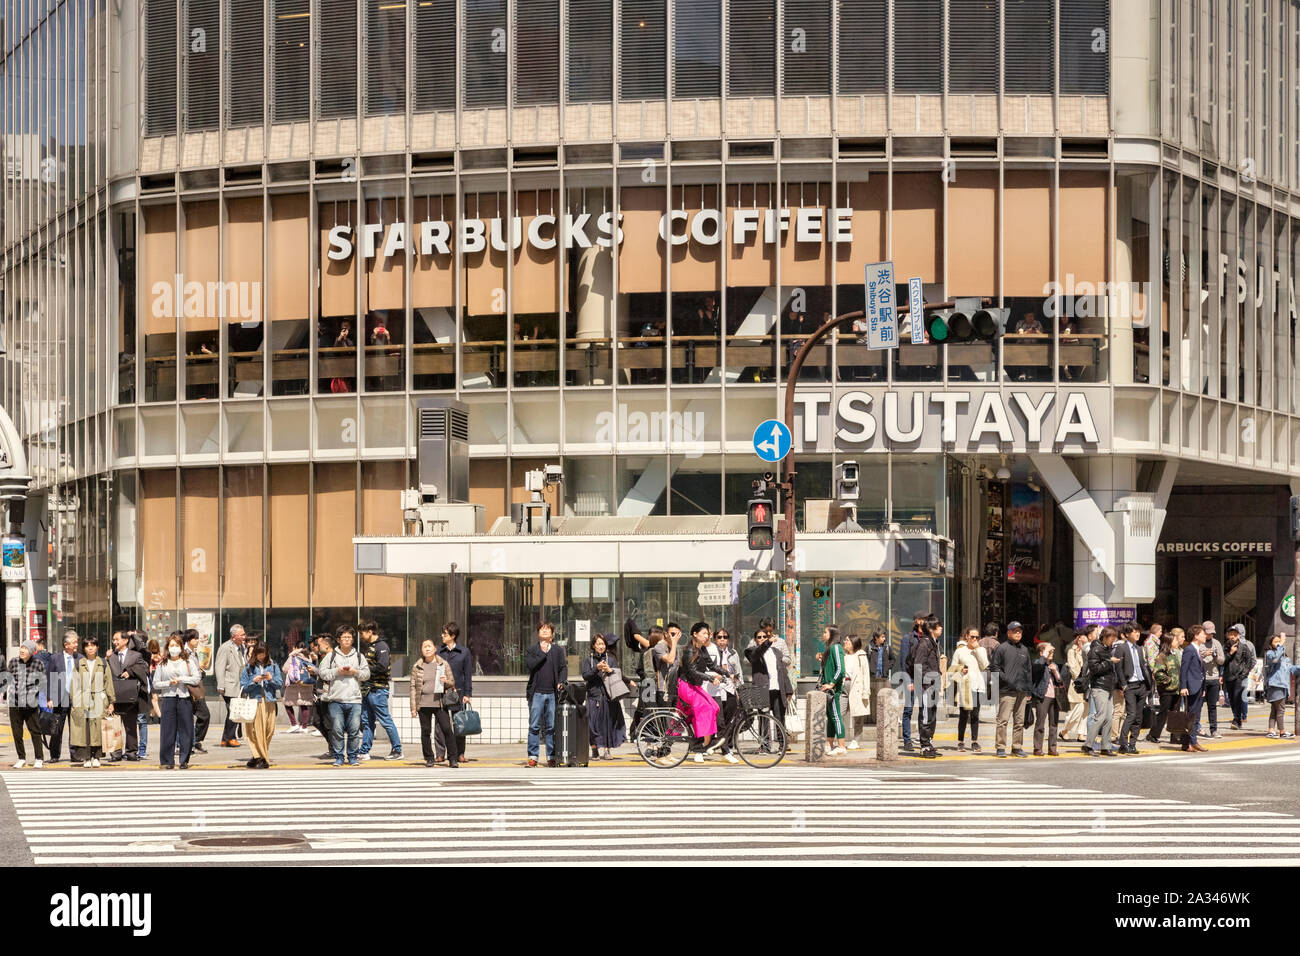 9 April 2019: Tokyo, Japan - Crowd of people waiting to cross the road at Shibuya Crossing, with Starbucks Coffee behind them. Stock Photo